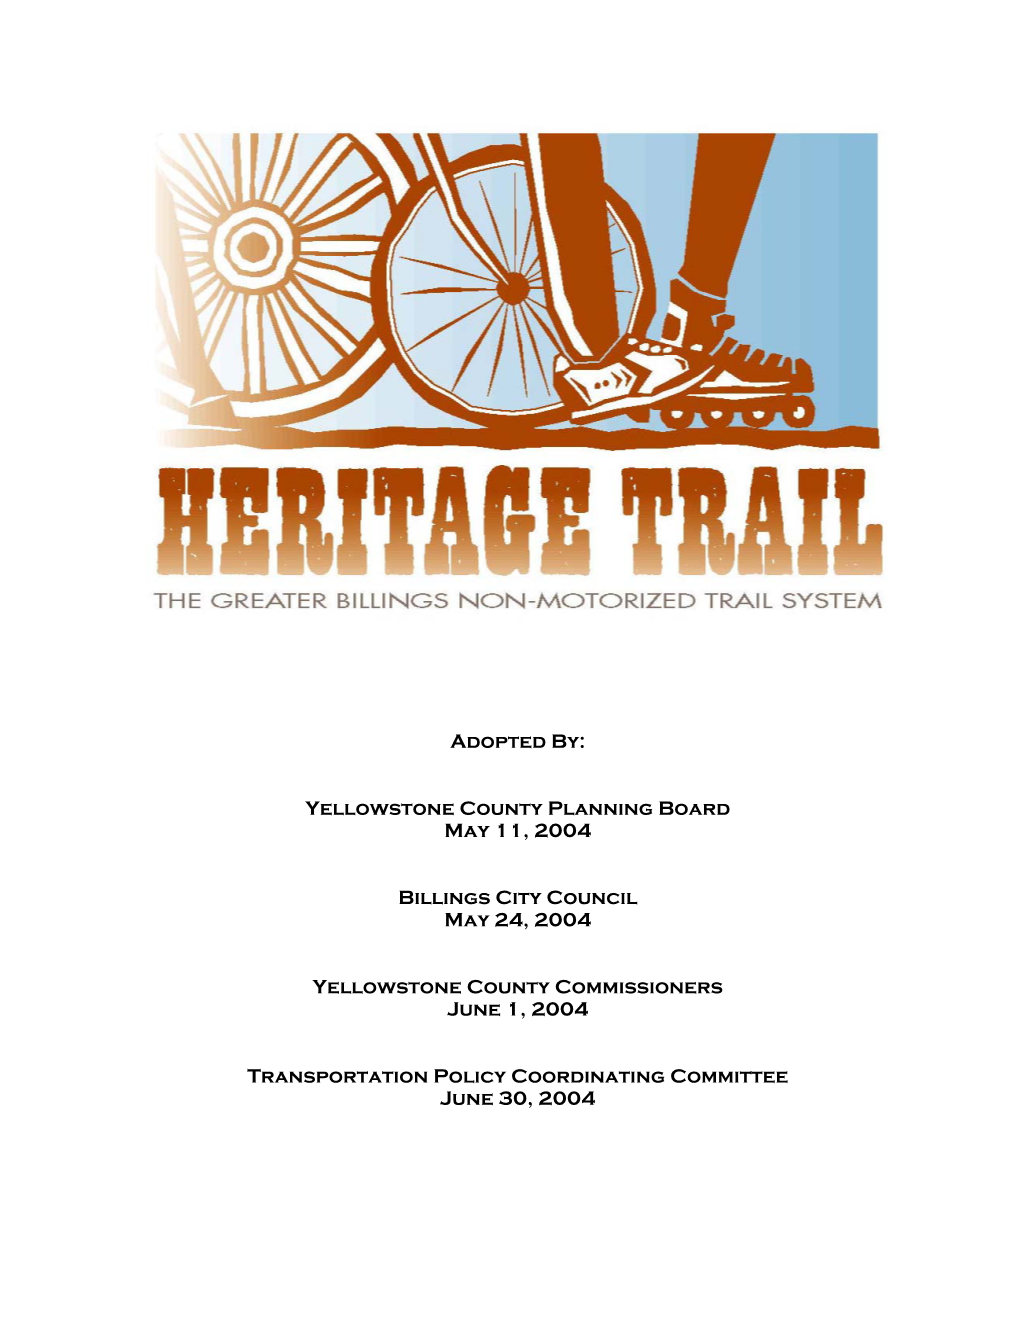 Heritage Trail Plan Updates the Facility Classifications That Were Included in the Bikenet Plan to Be Consistent with Accepted National Standards